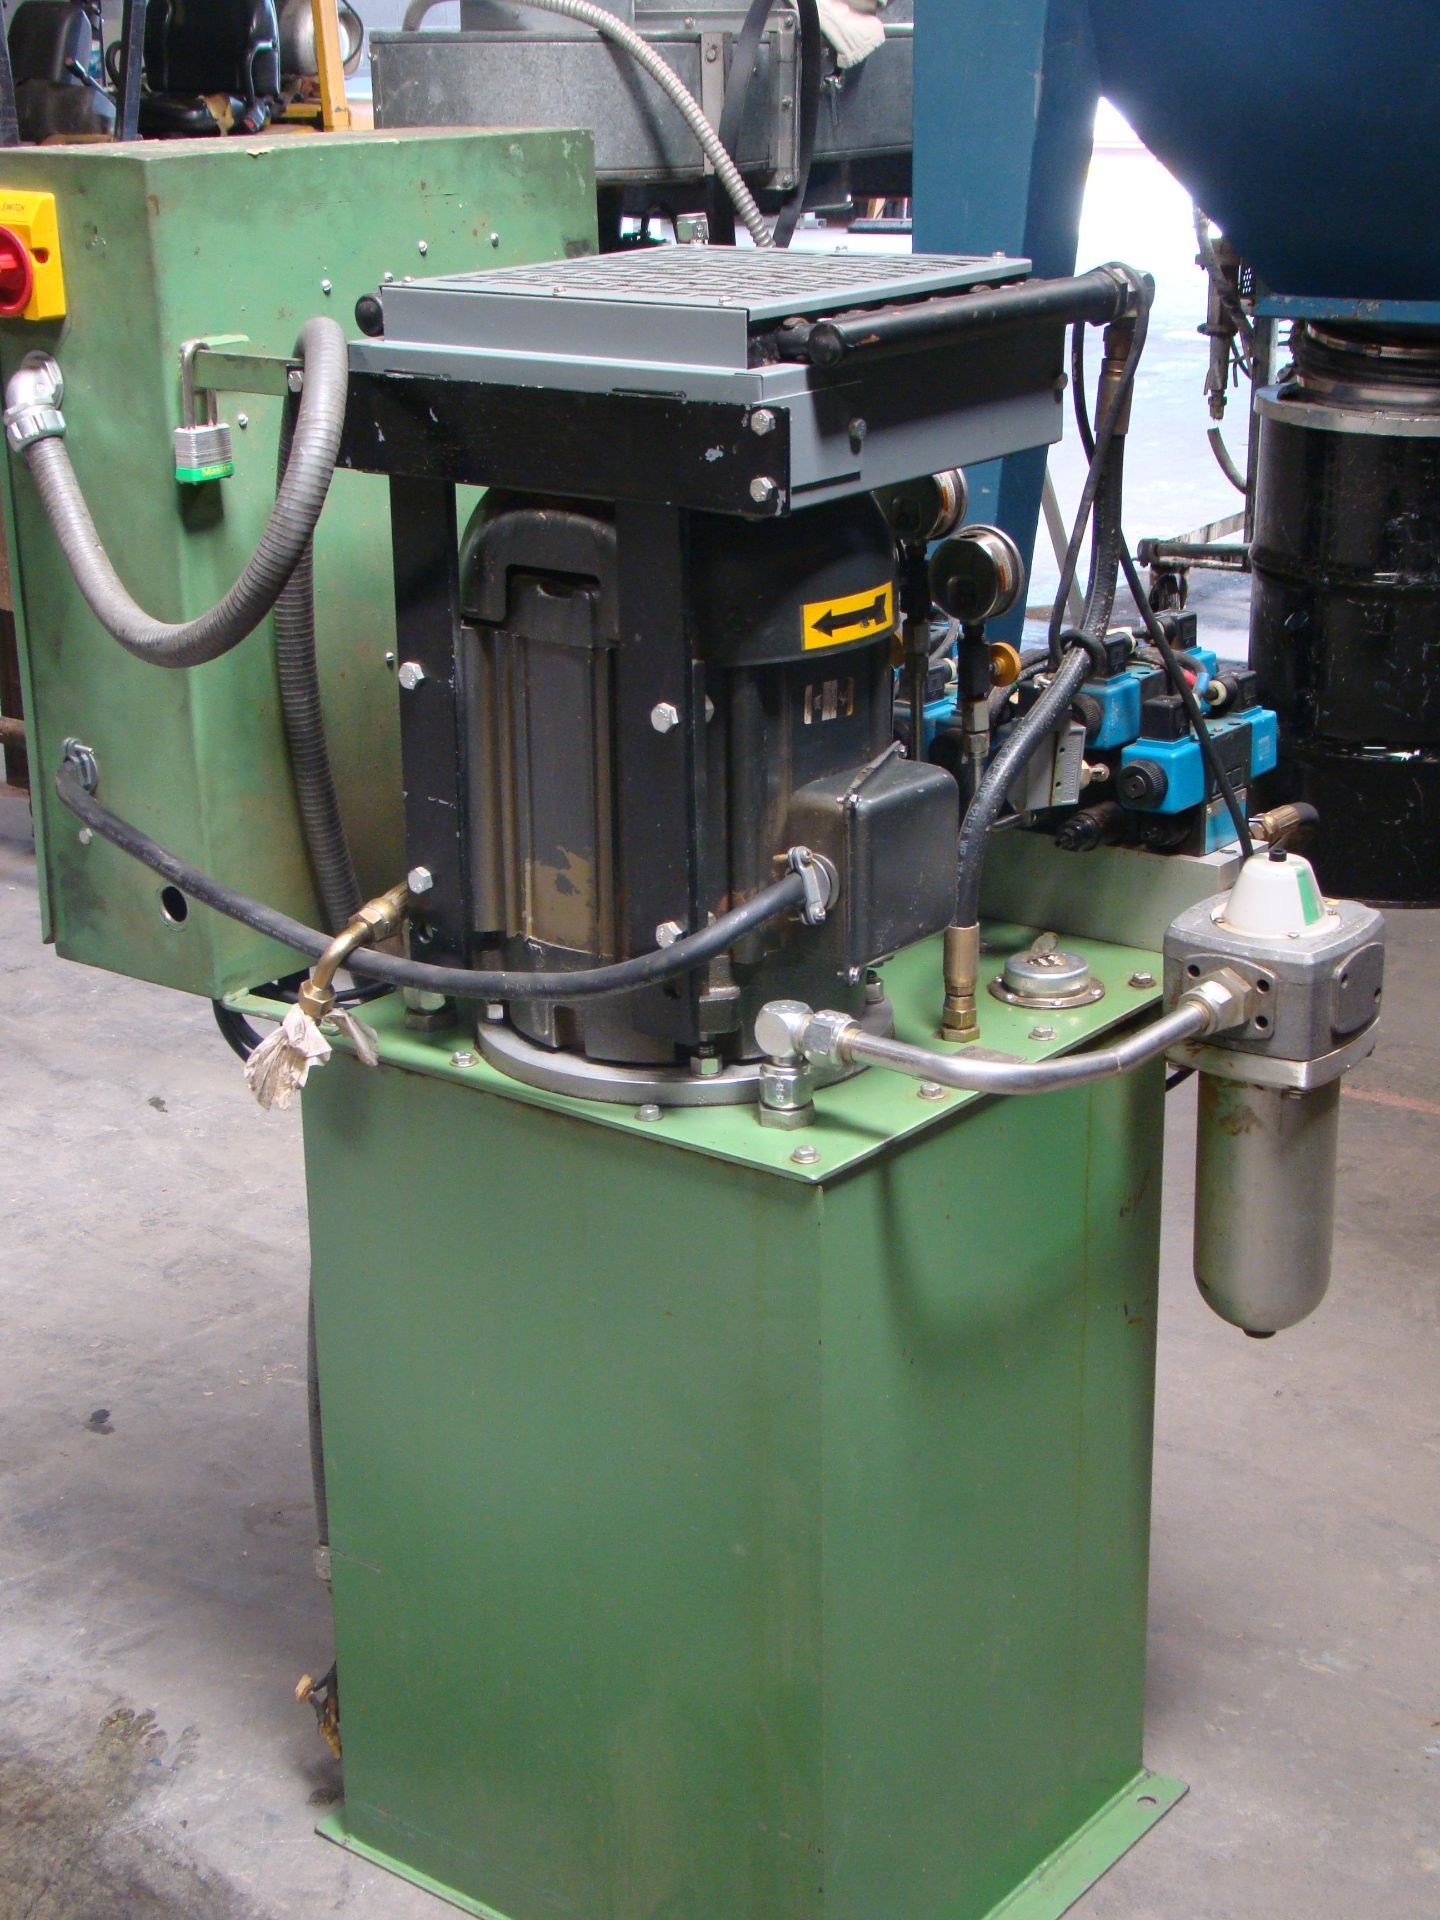 Taylor 40 Station Hydraulic Clamp Carrier with Flattener, 3 Pallets of Clamps, Clamp is Disassembled - Image 9 of 12